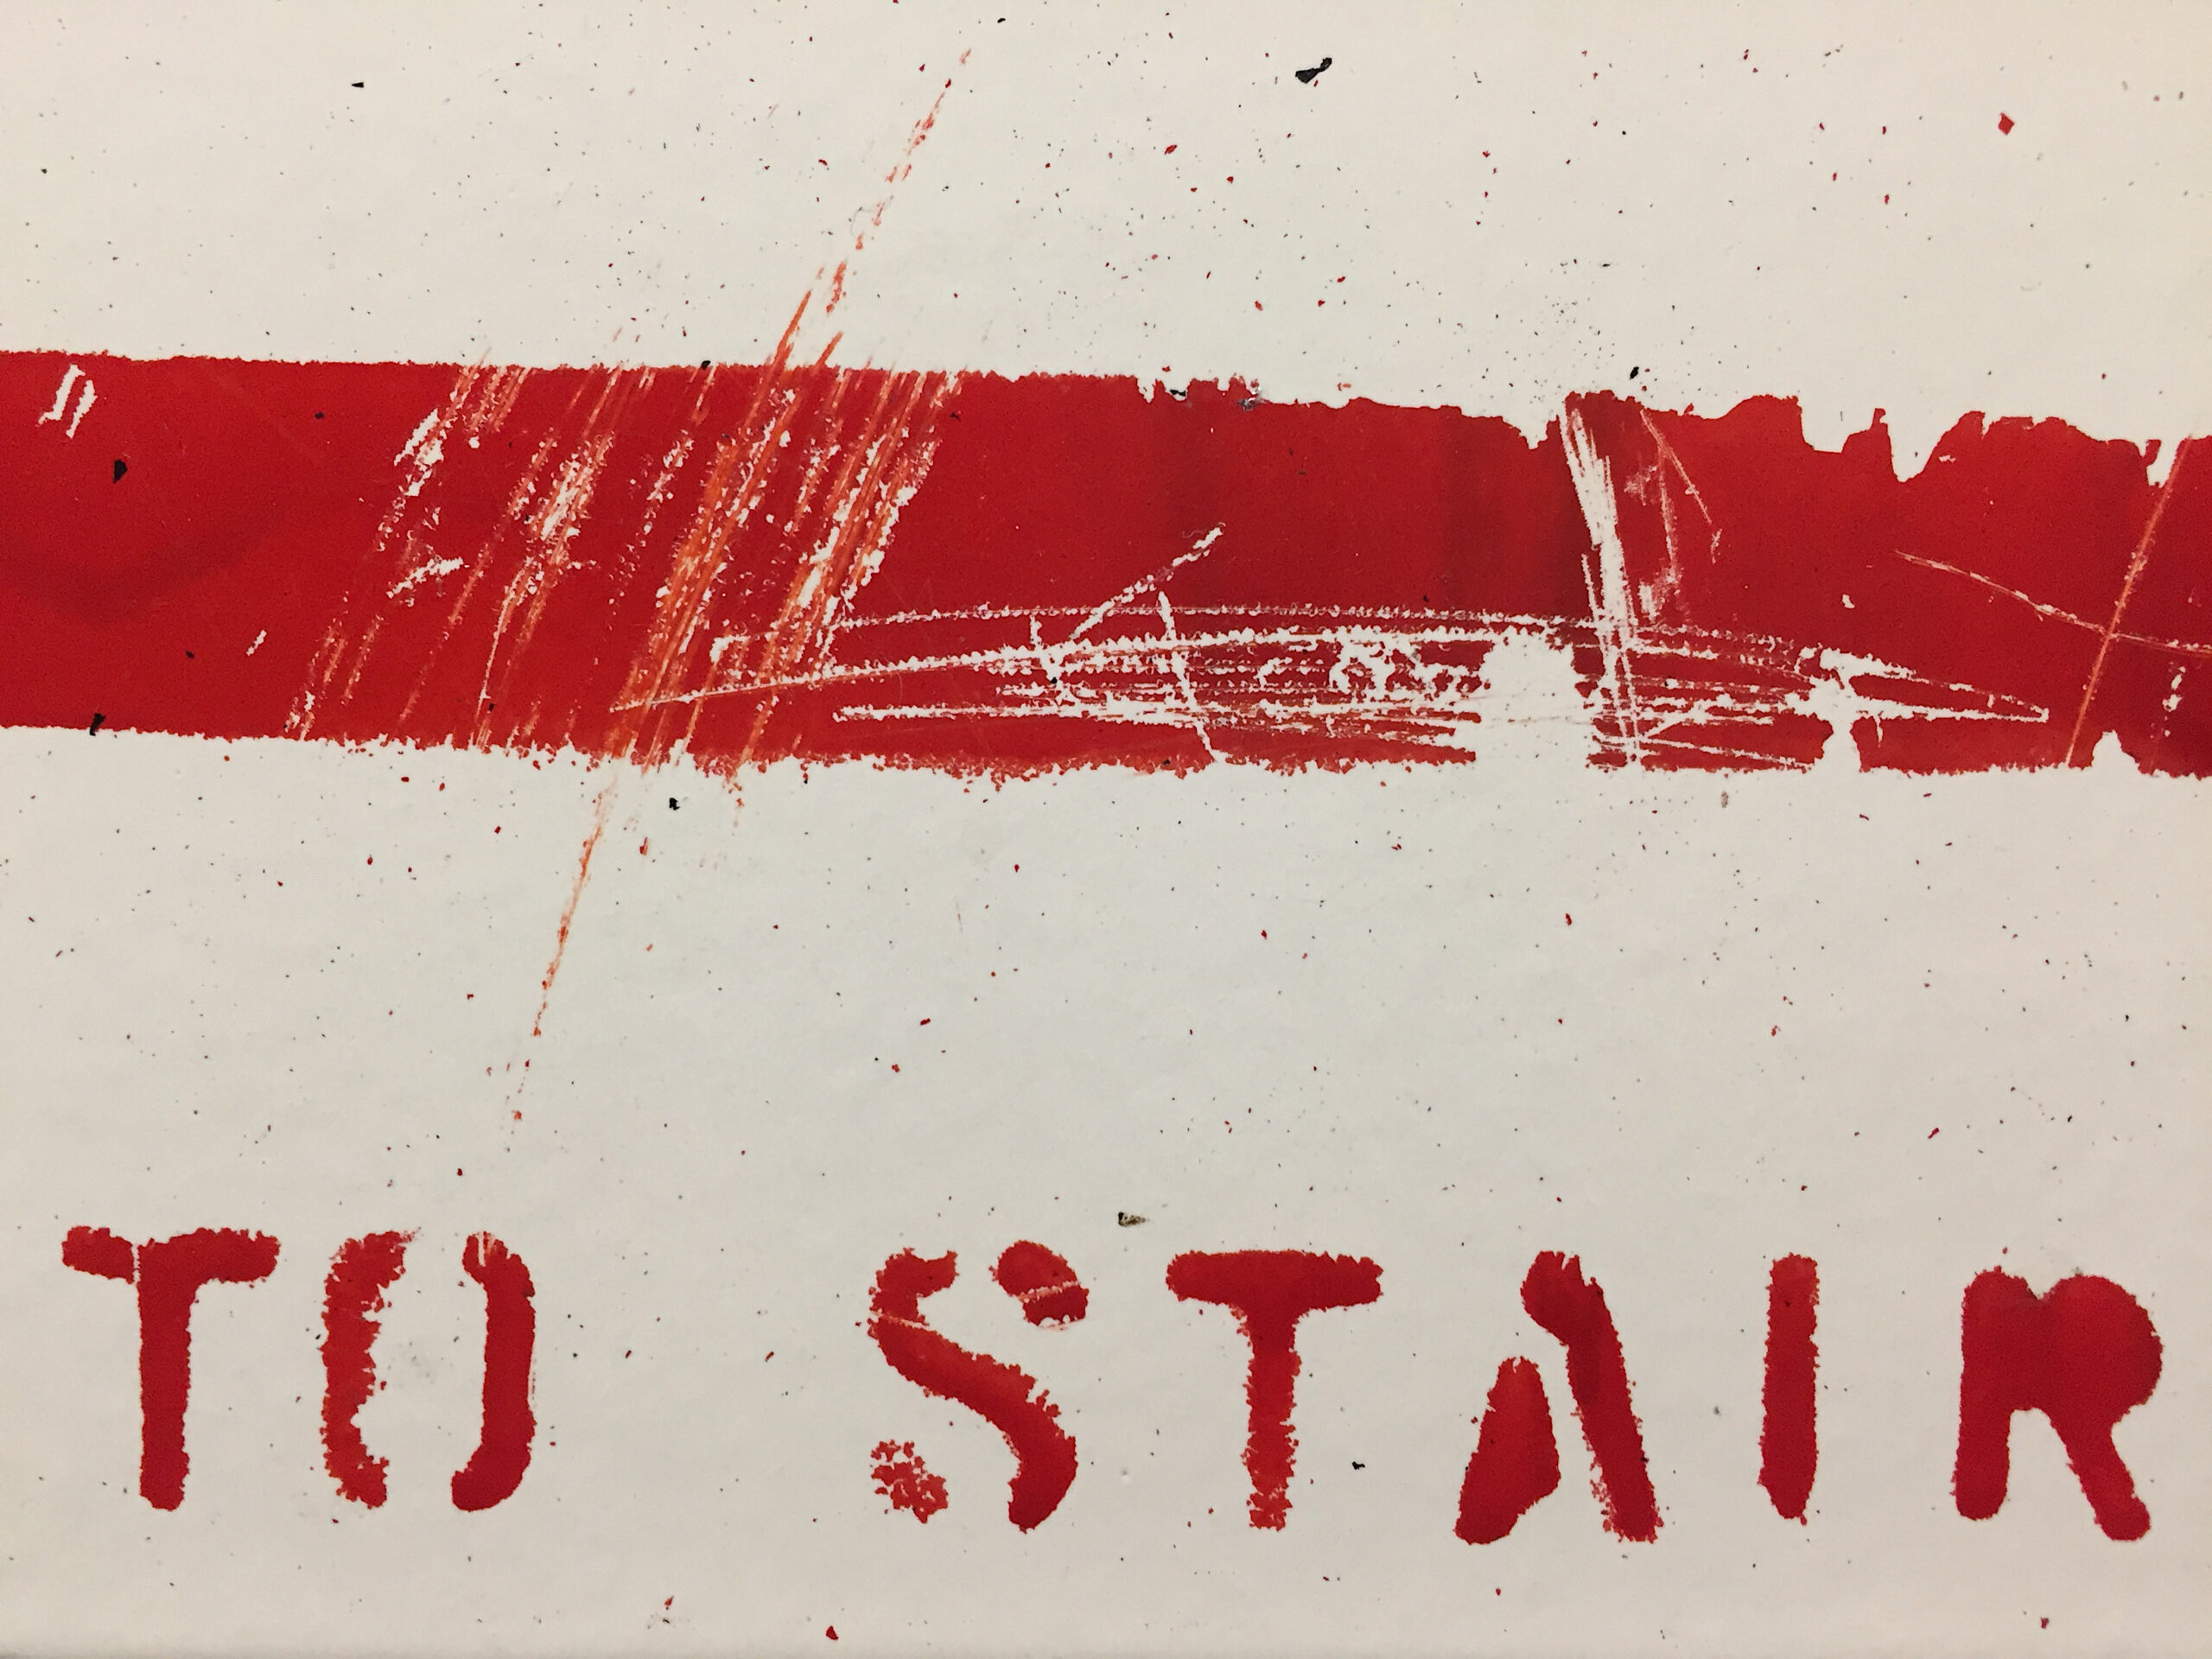 Close-up image of "To Stair" wall sign